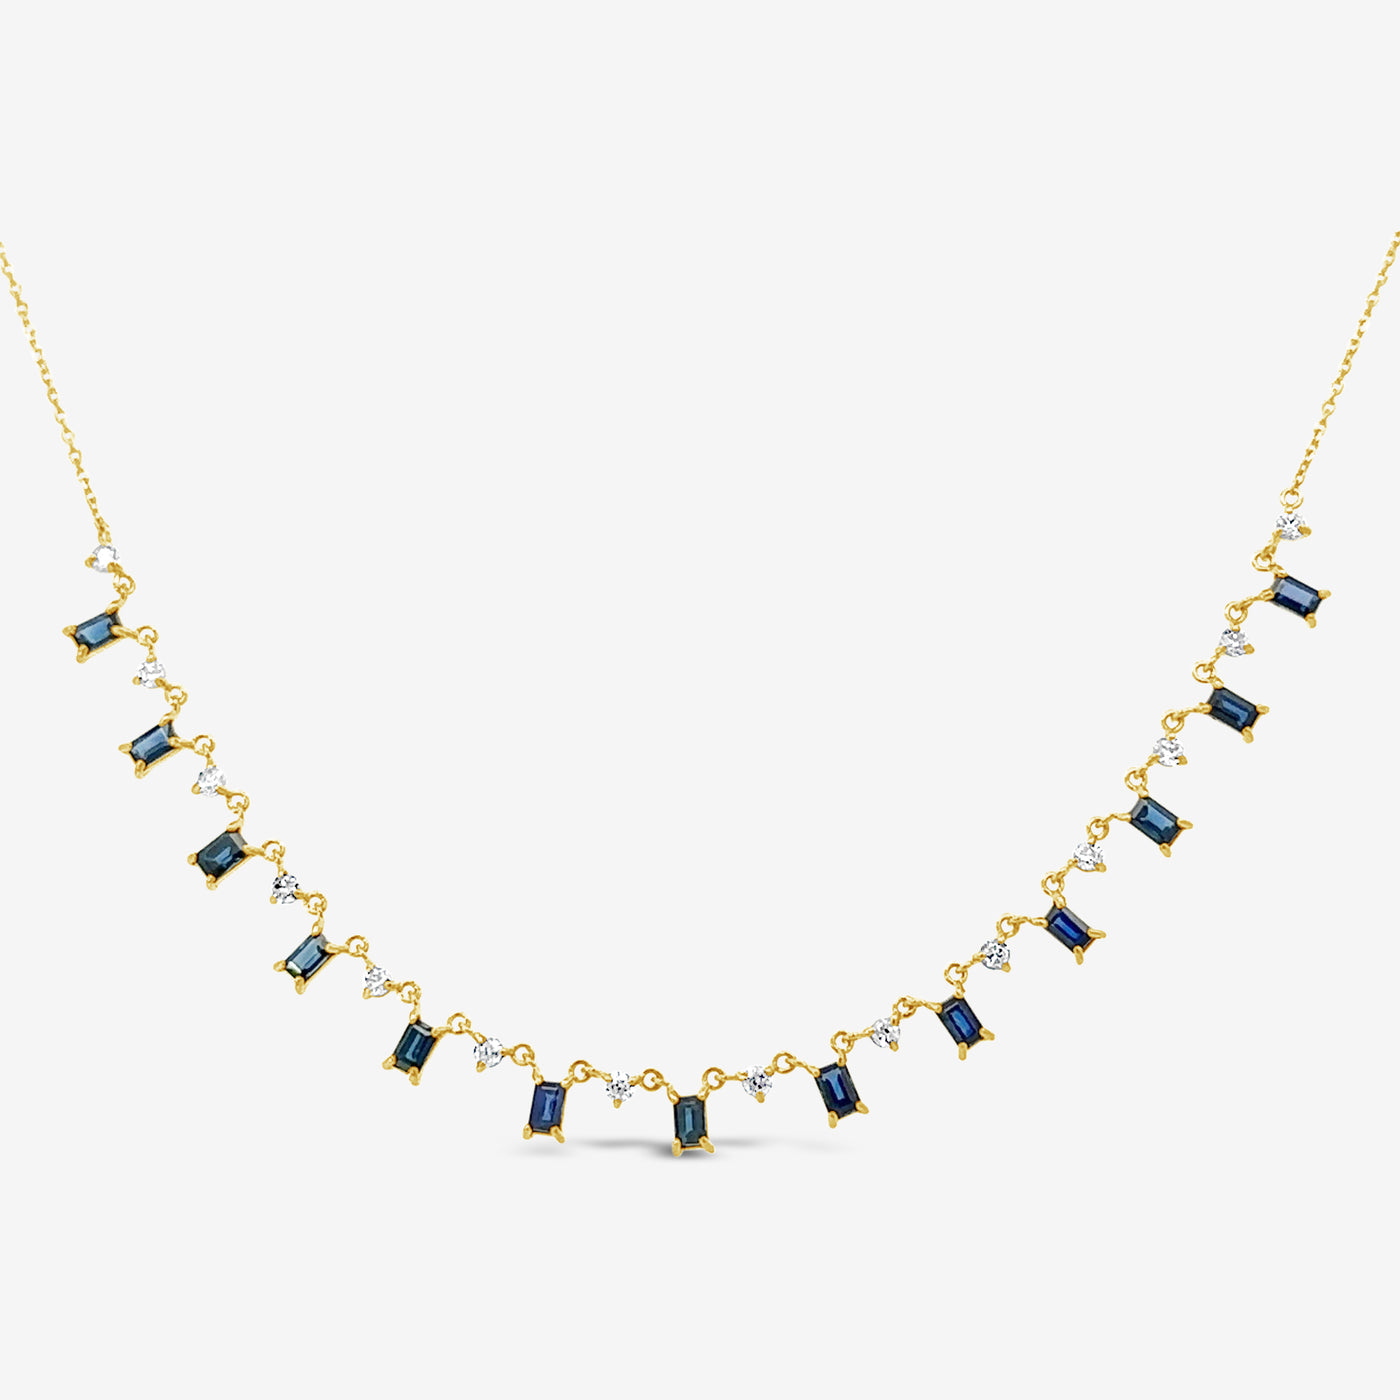 13 Drops By The Yard 1.50CT Diamond & Sapphire Necklace